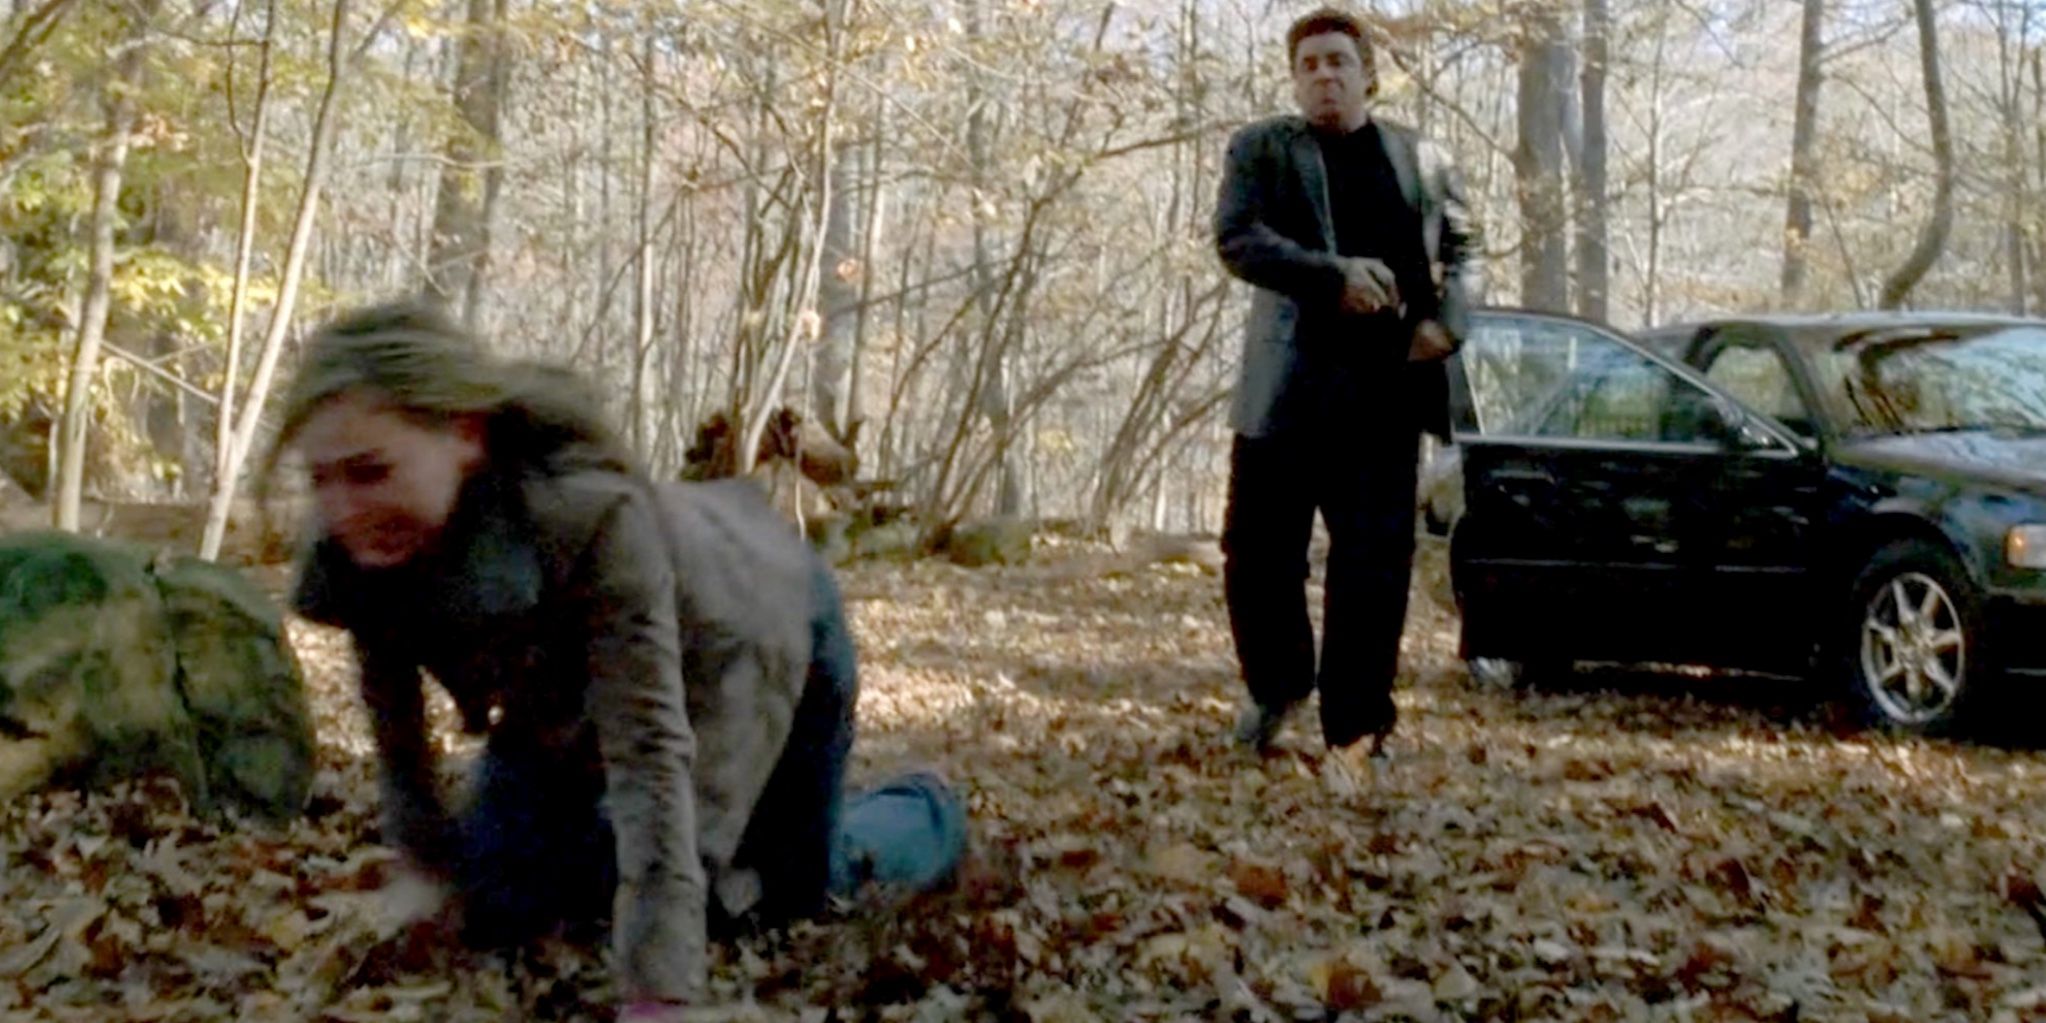 Adriana on her knees in a forest while Silvio attempts to shoot her in The Sopranos